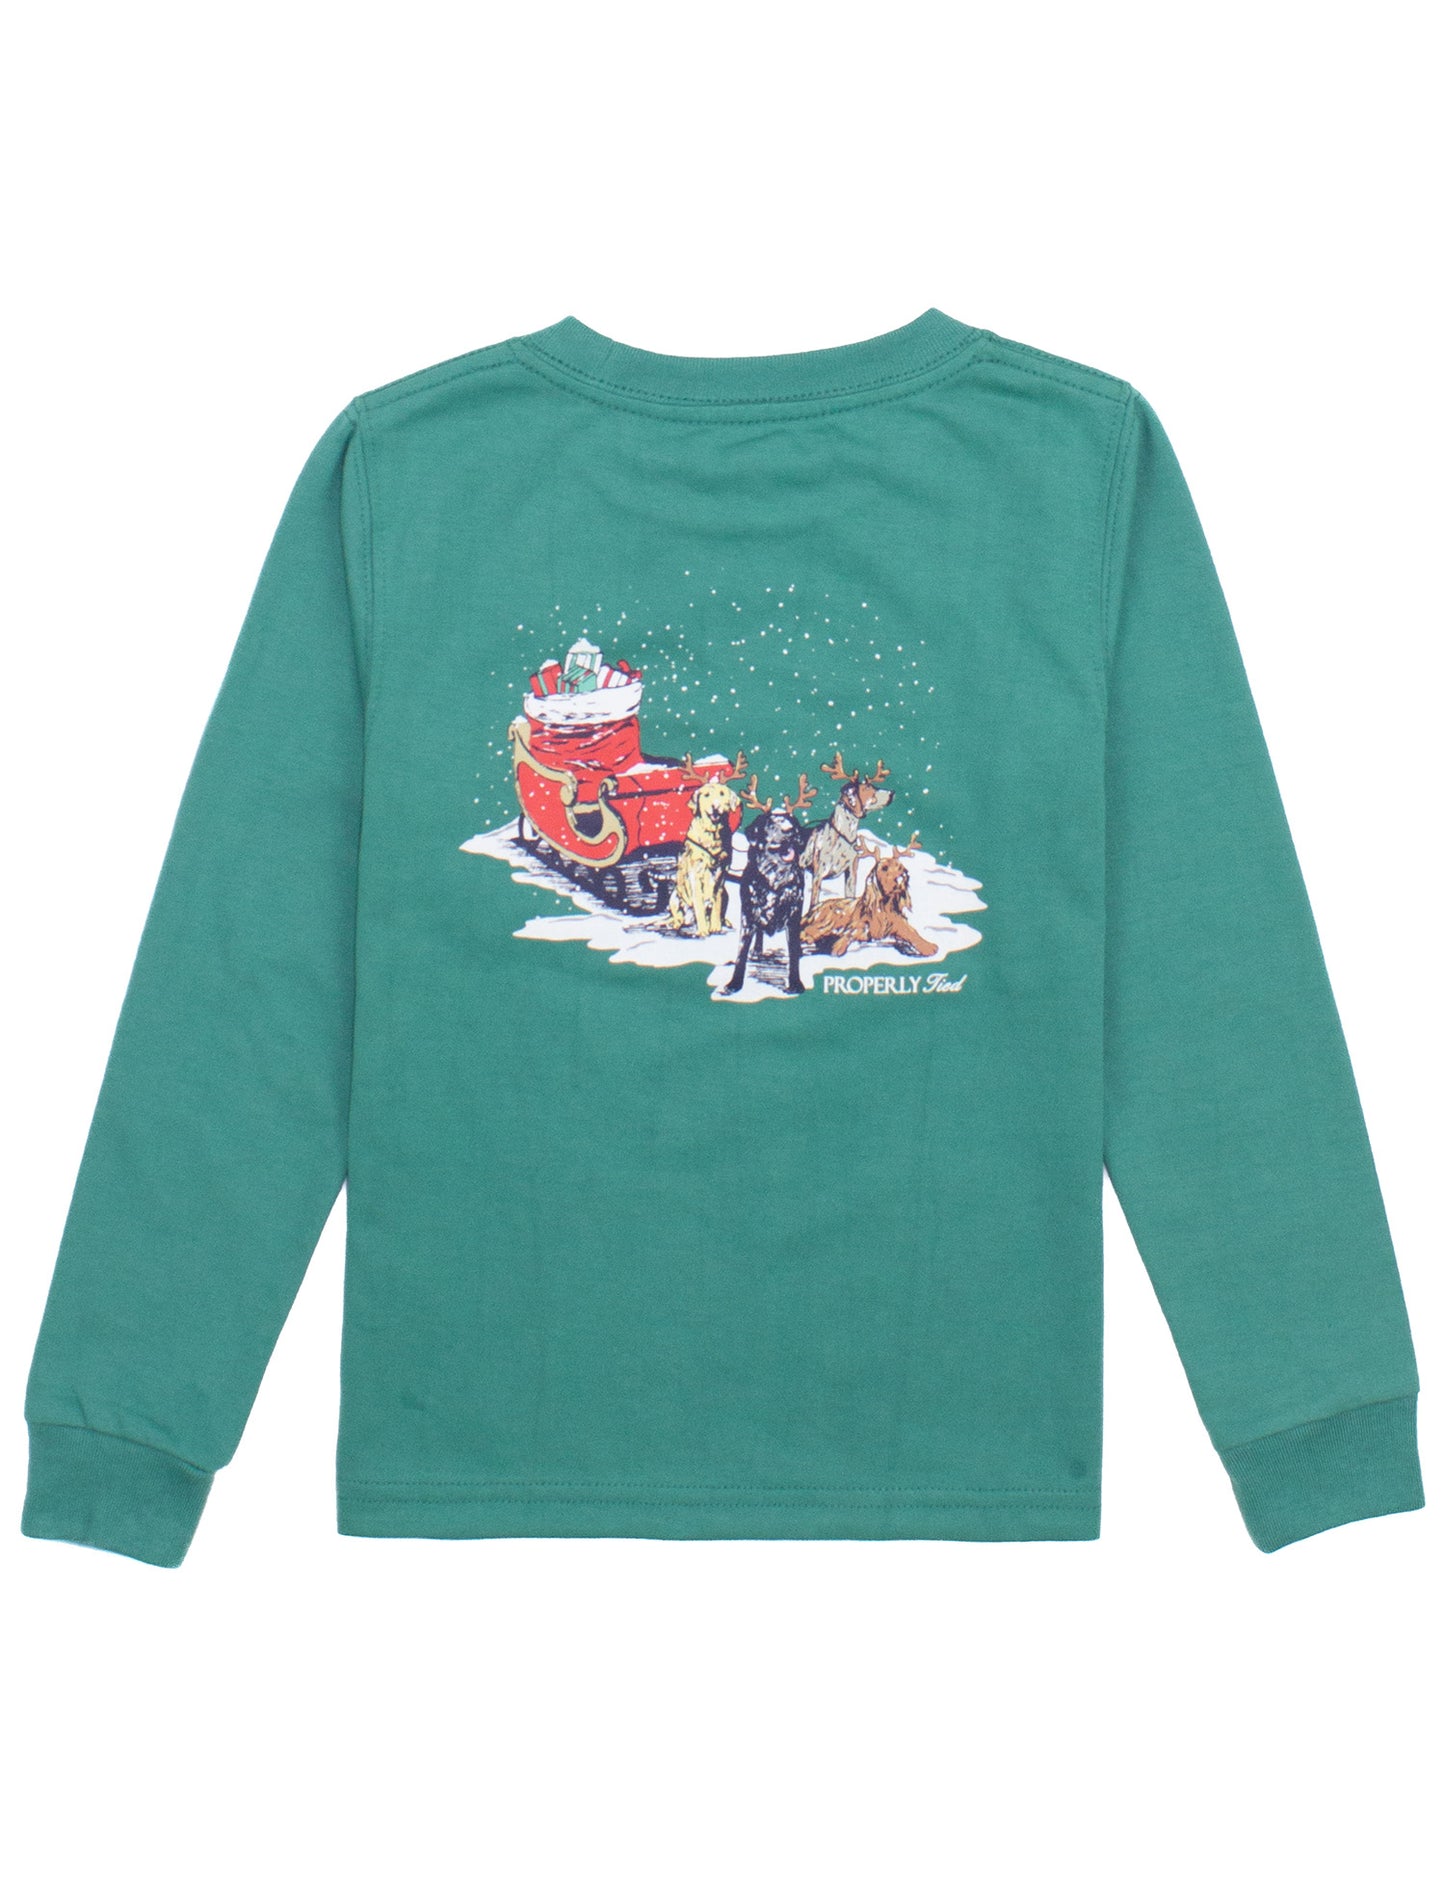 Properly Tied Sleigh Dogs Teal LS